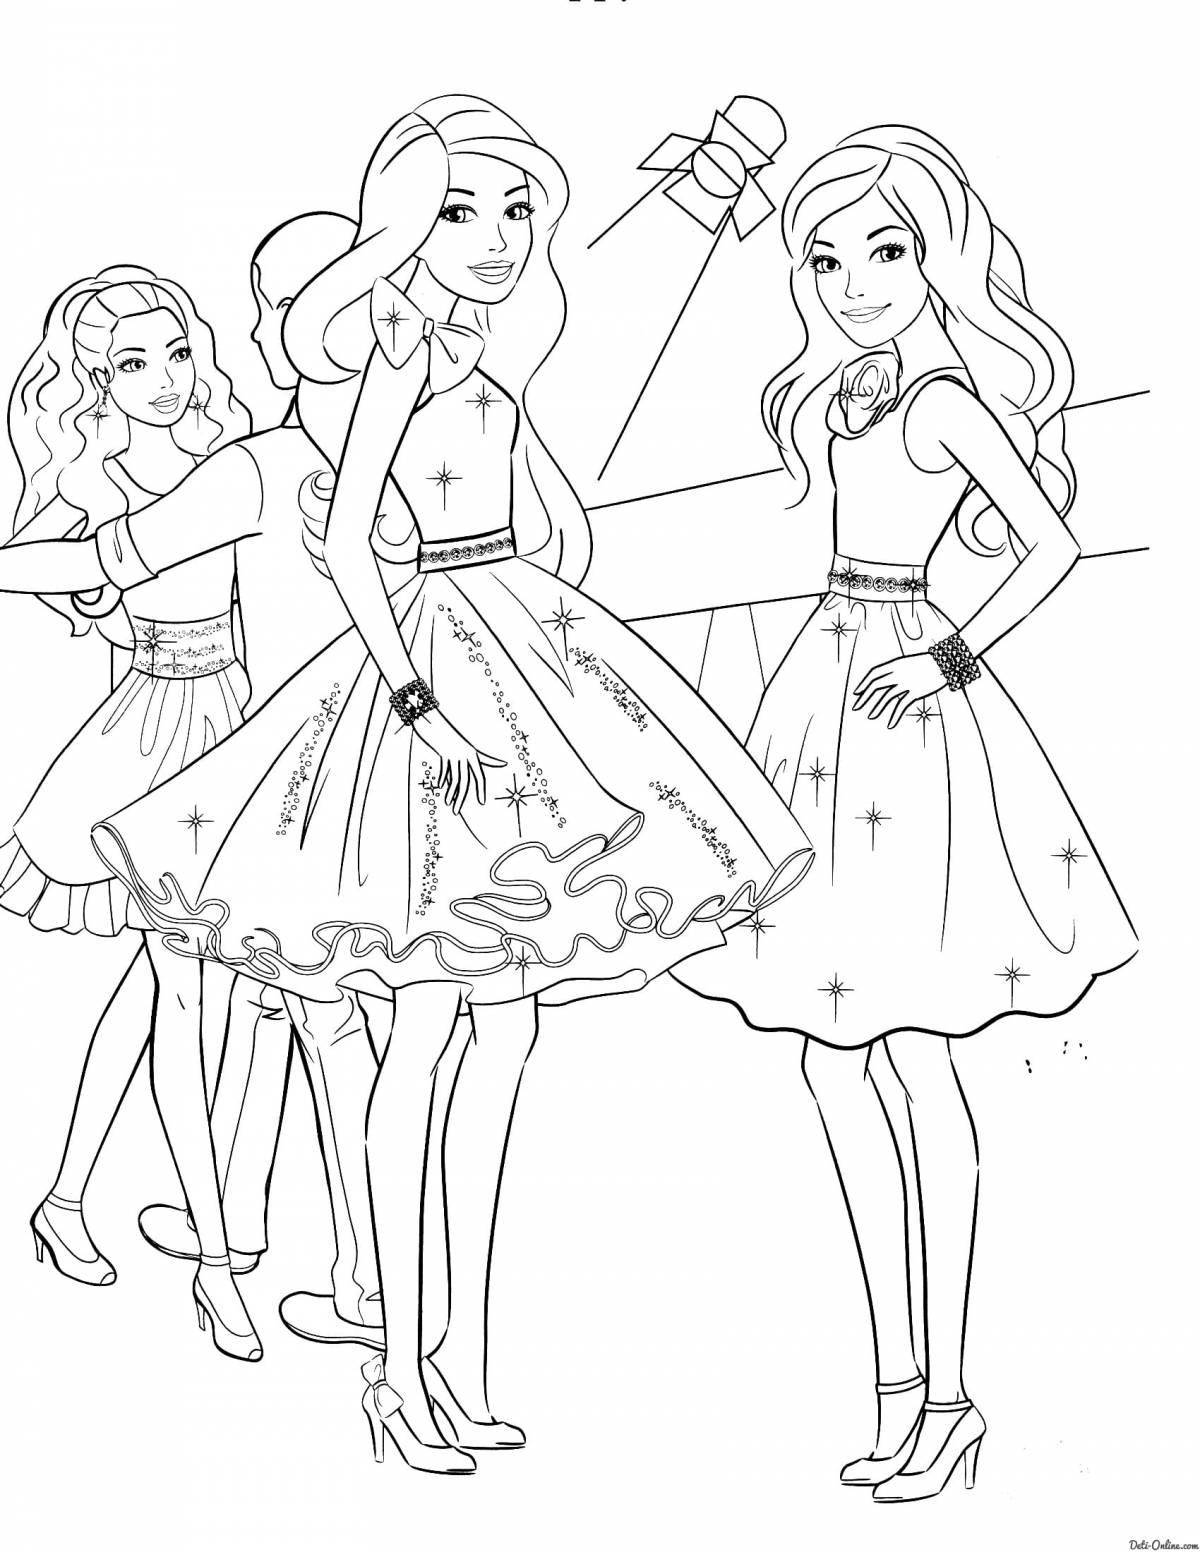 Tempting Barbie doll coloring book for kids